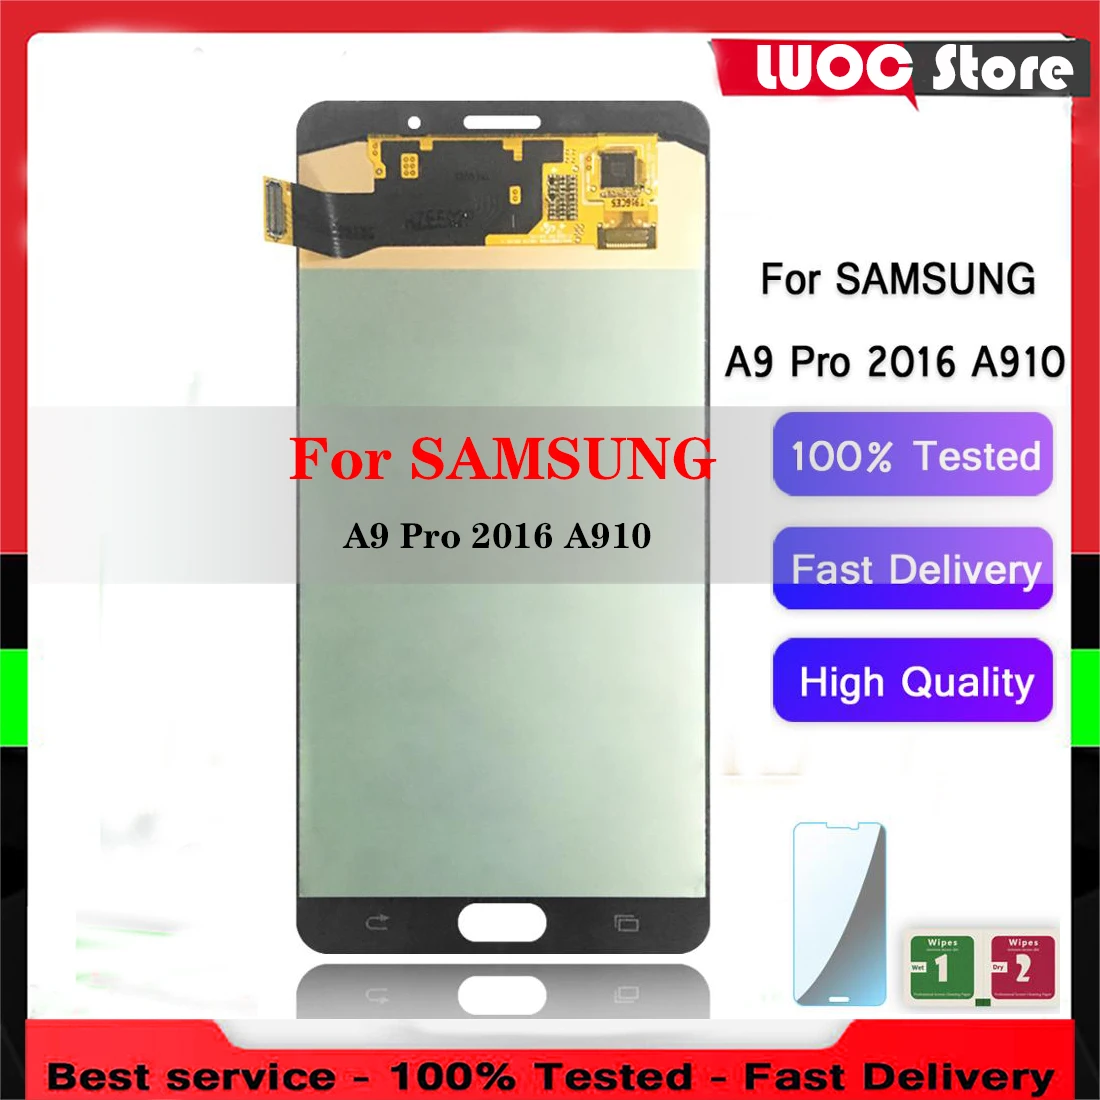 

Super HD AMOLED LCD Display For Samsung Galaxy A9 Pro 2016 A910 A9100 A910F SM-A910F Touch Screen Digitizer Assembly Replacement